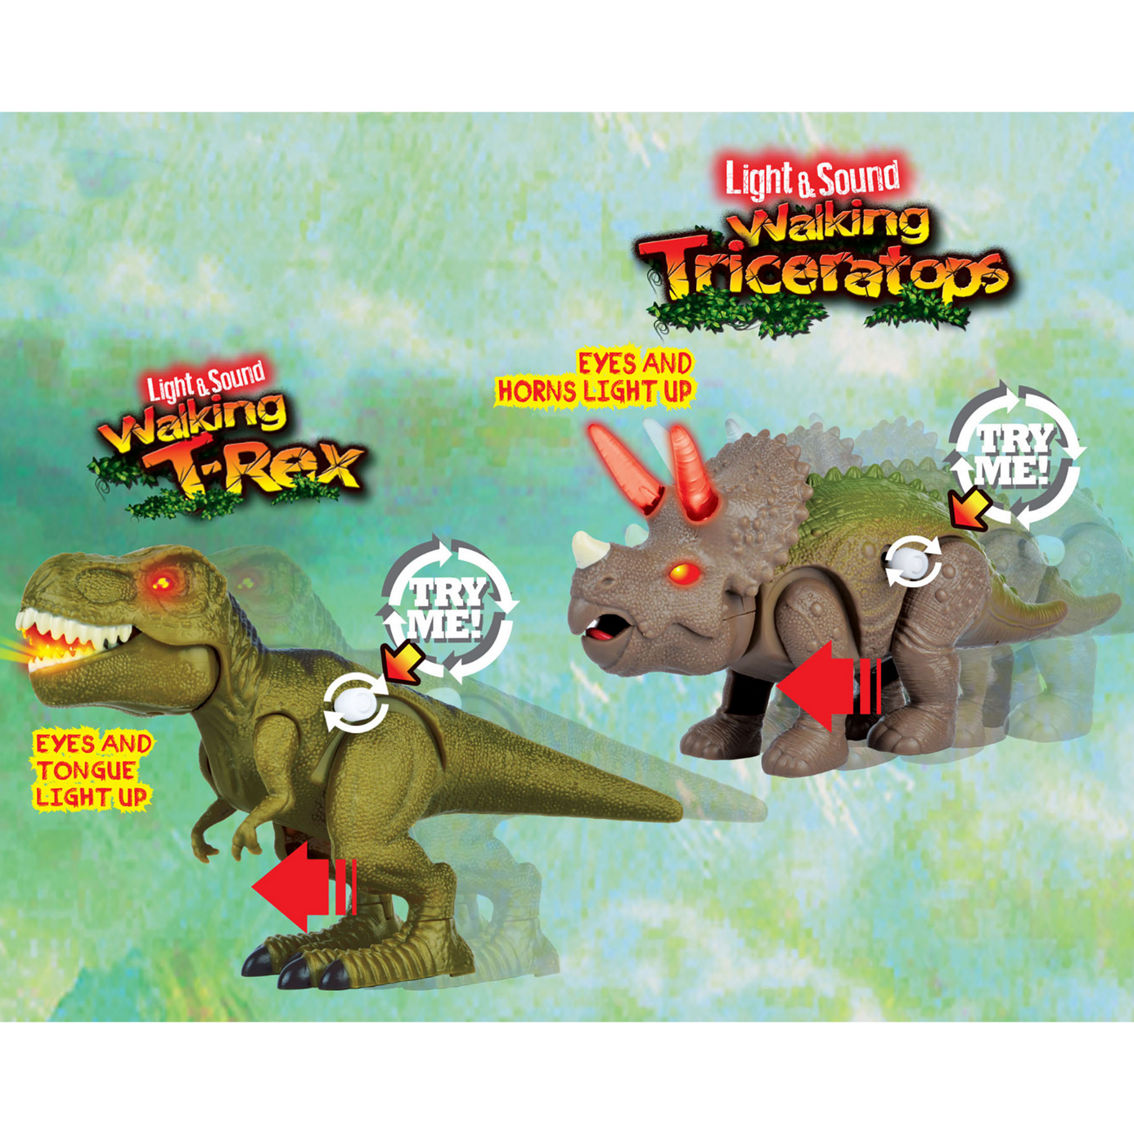 Red Box Toy Dinosaur Park with Light and Sound T Rex and Triceratops - Image 4 of 5